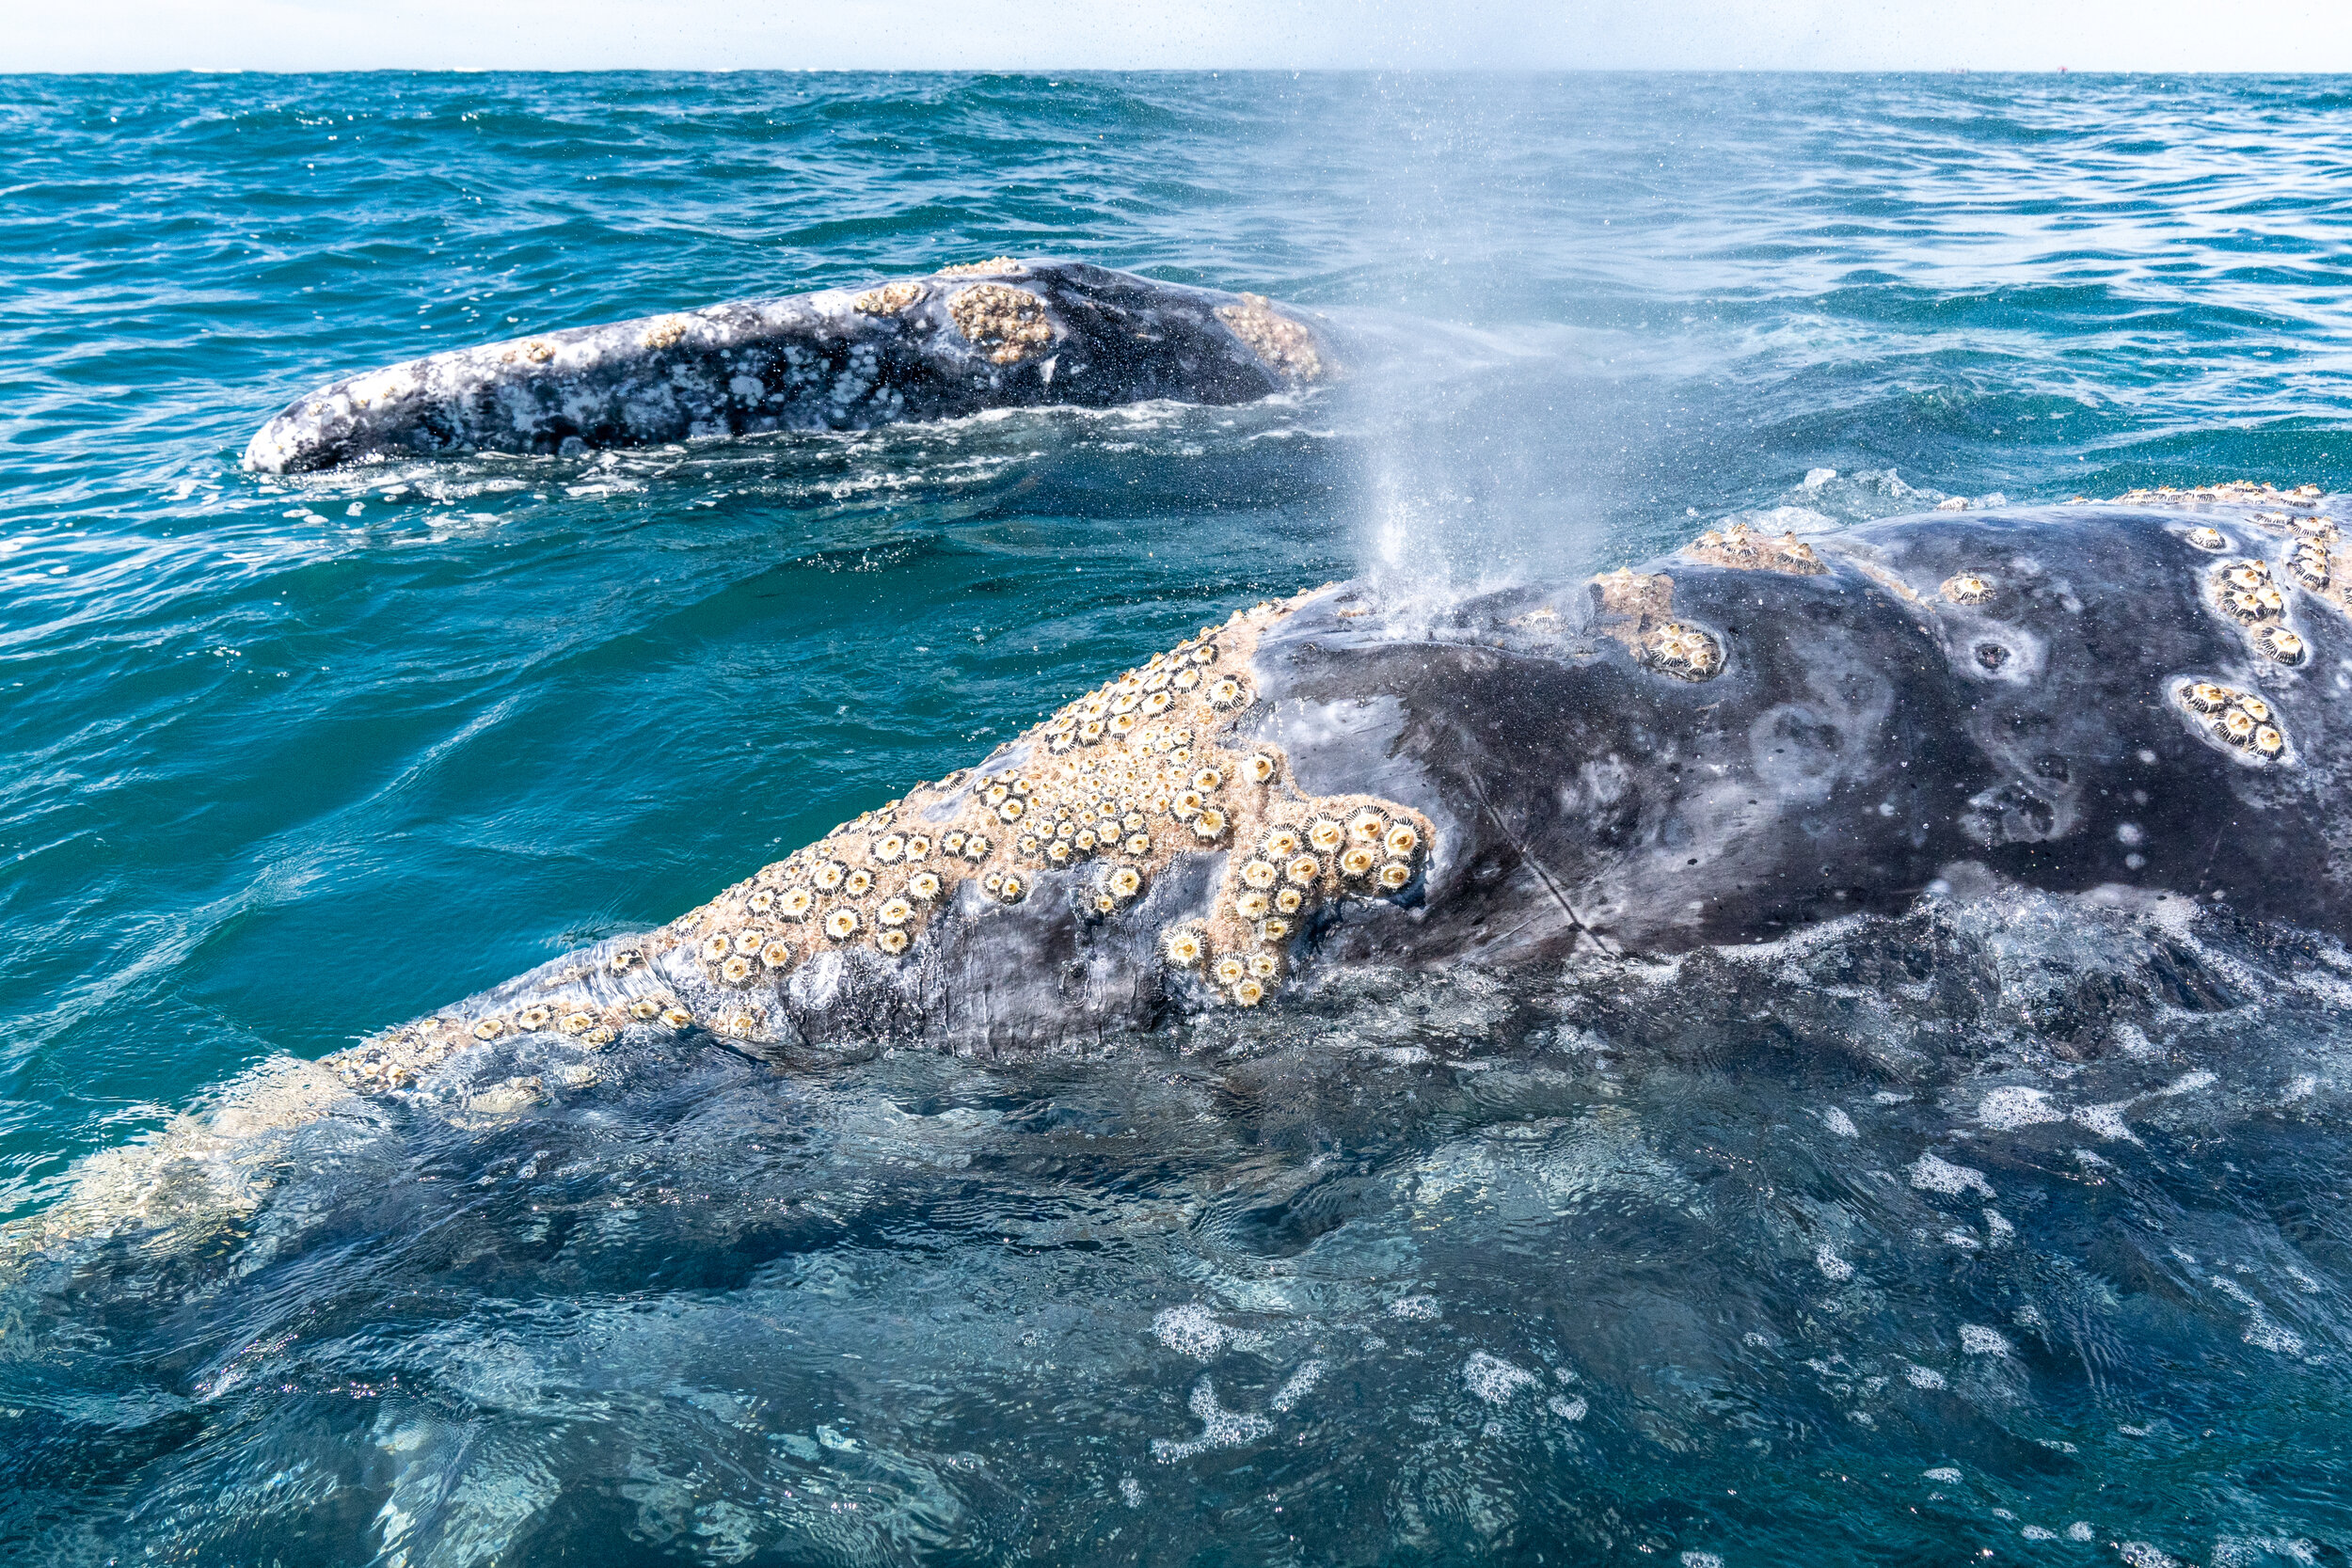 Gray whale mother and calf surface above the water in Baja California, Mexico